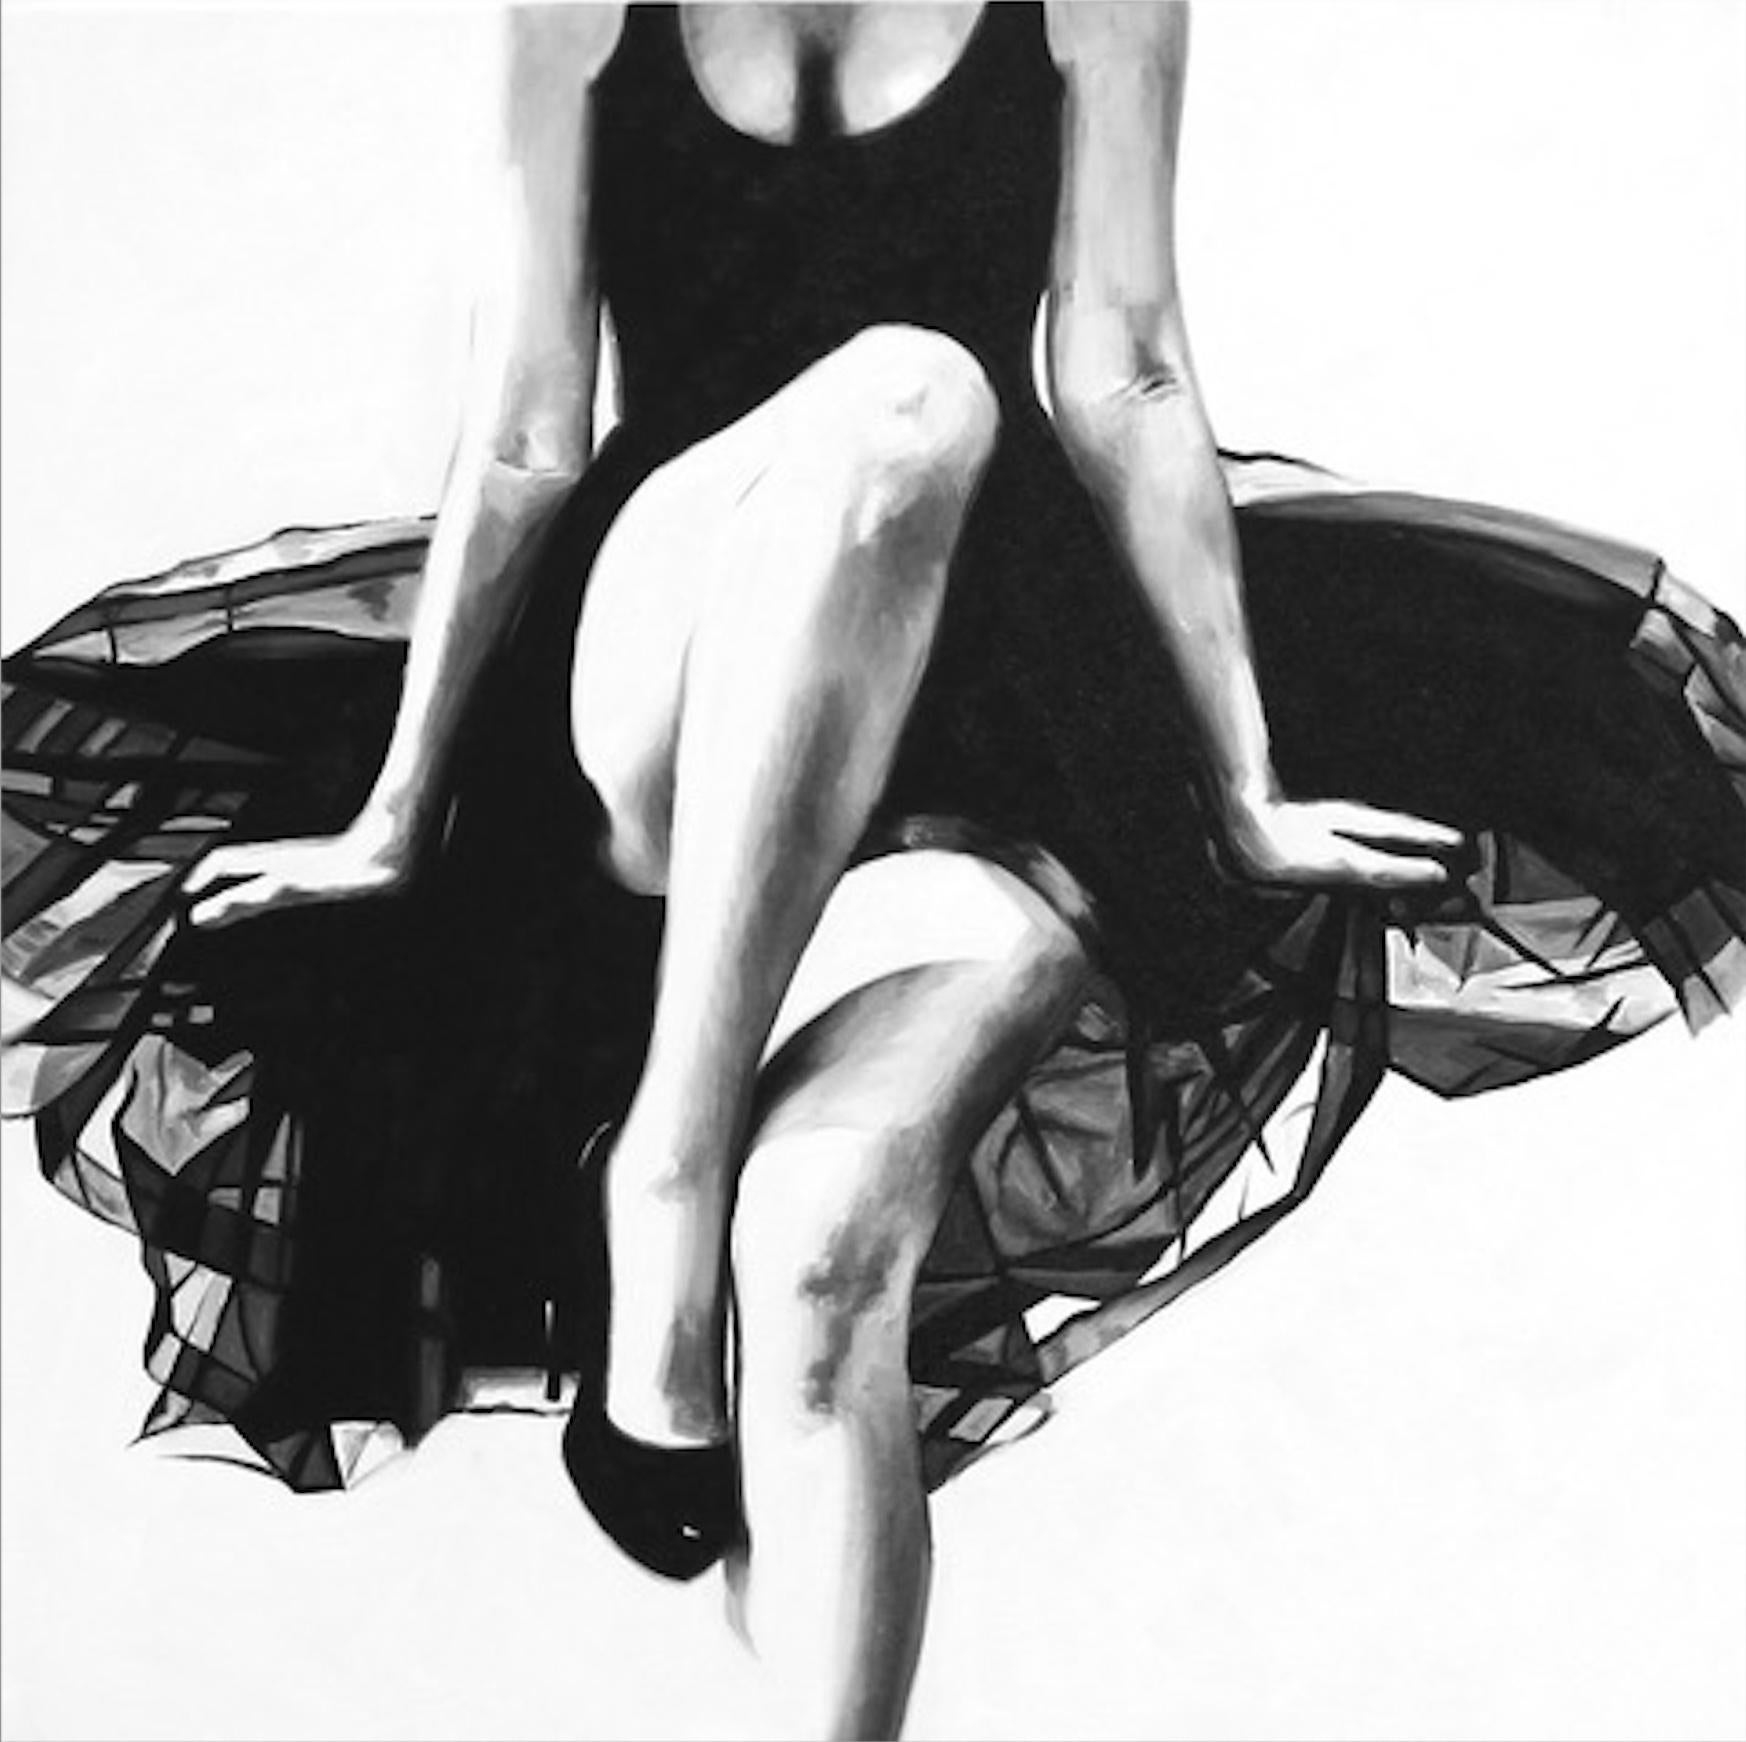 Cindy Press Figurative Painting - "Have You Seen My Date?" Black and white oil painting of woman in tulle, heels